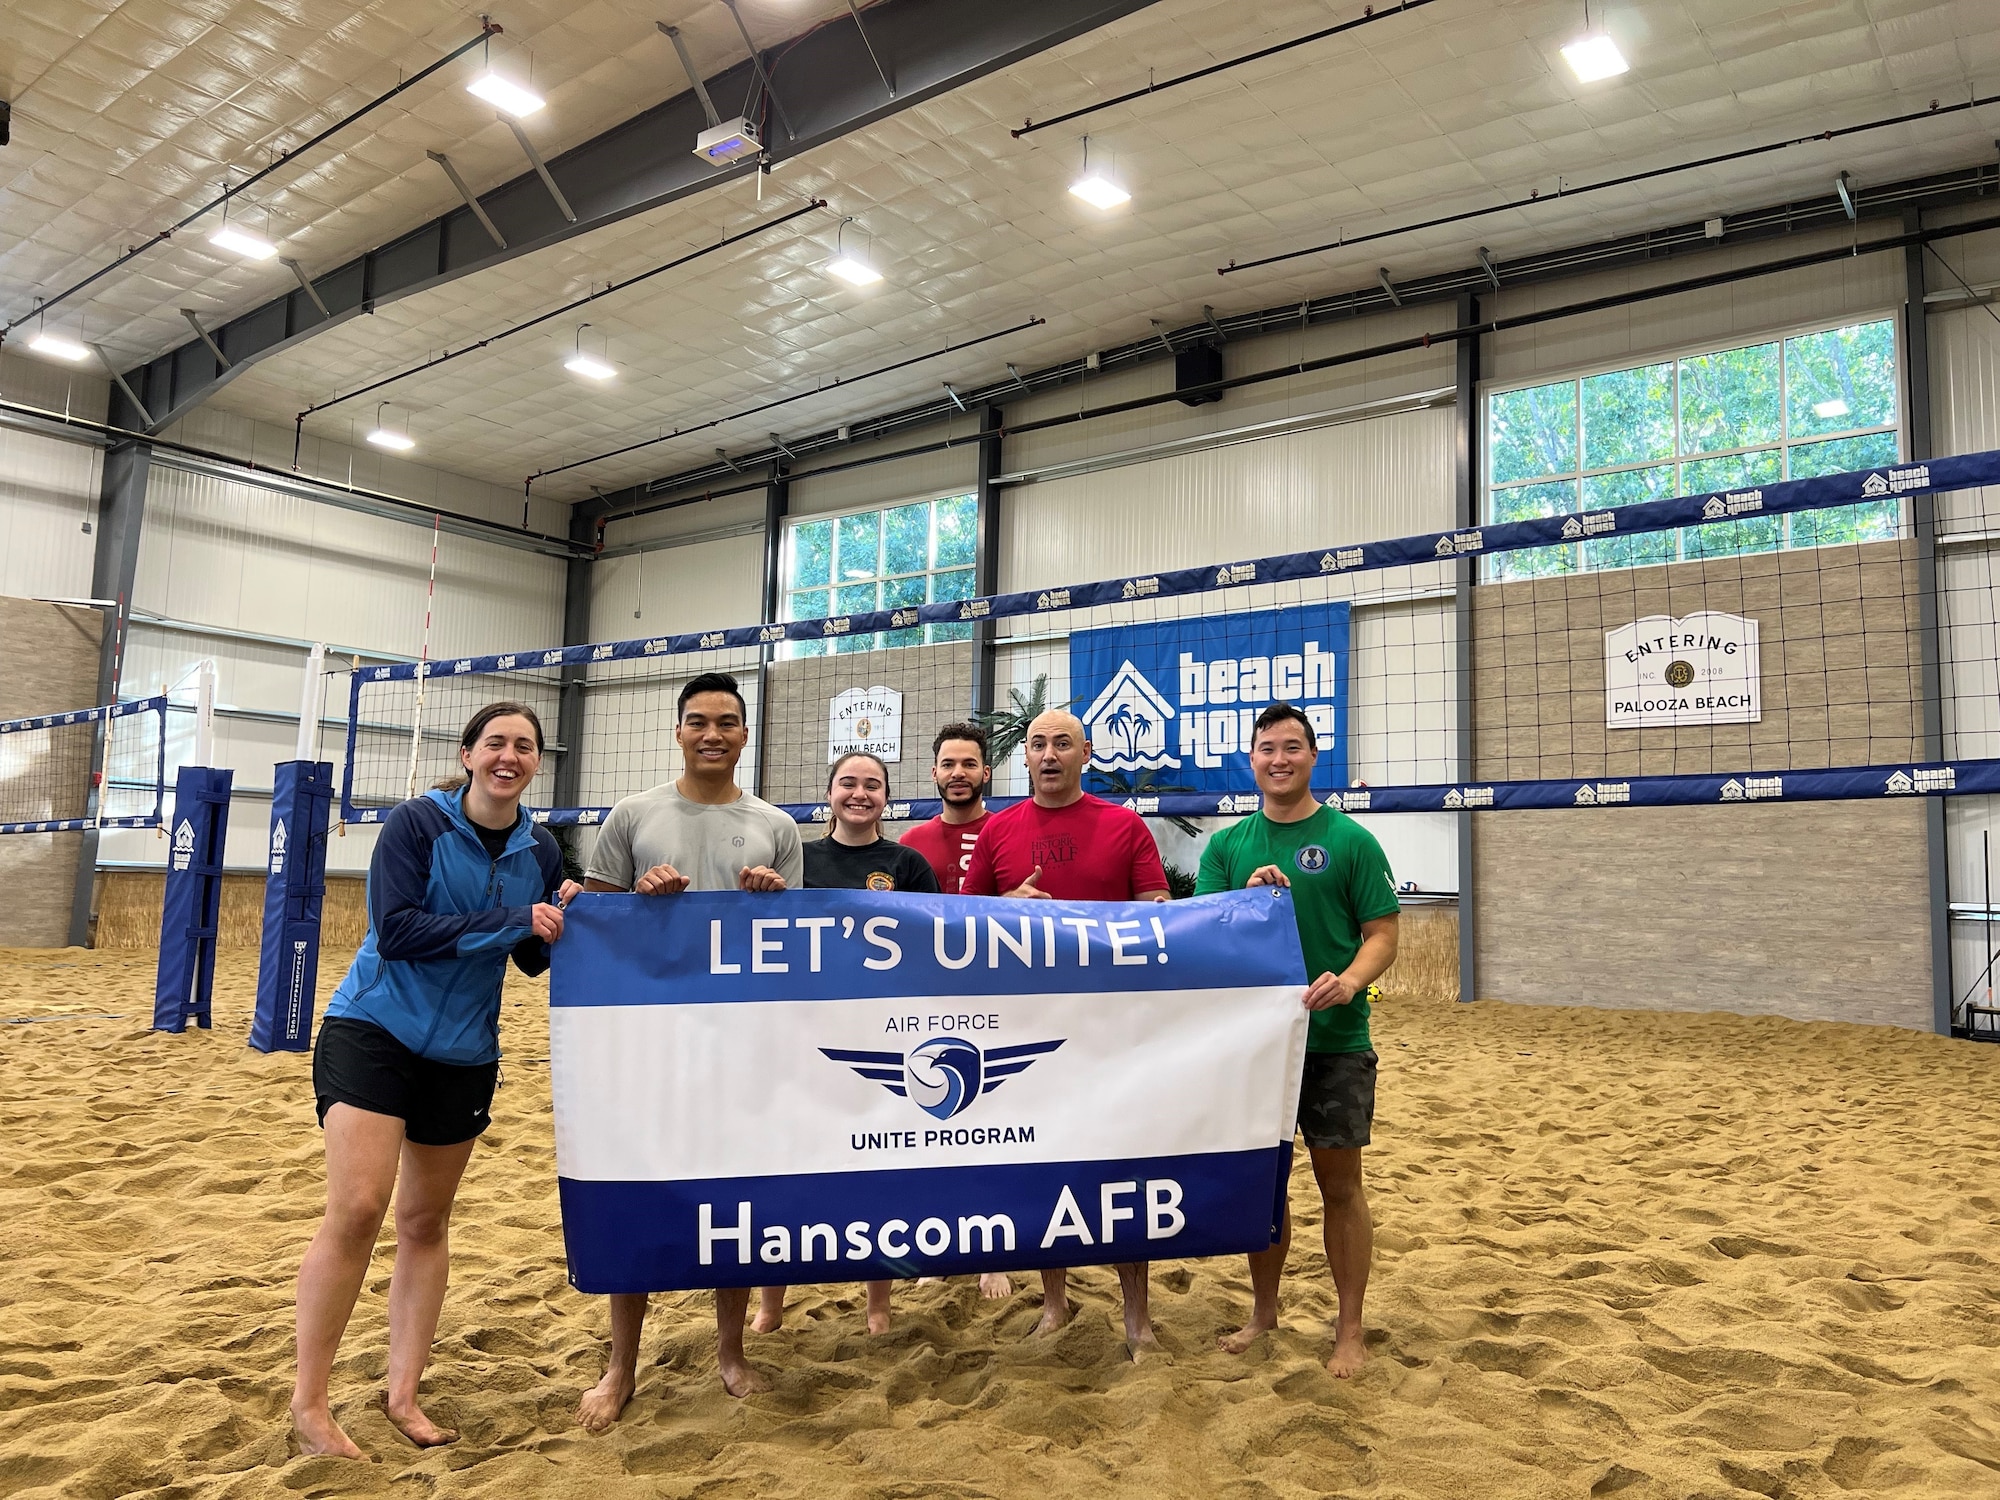 Members participating in a UNITE event, indoor beach volleyball, cohesion event